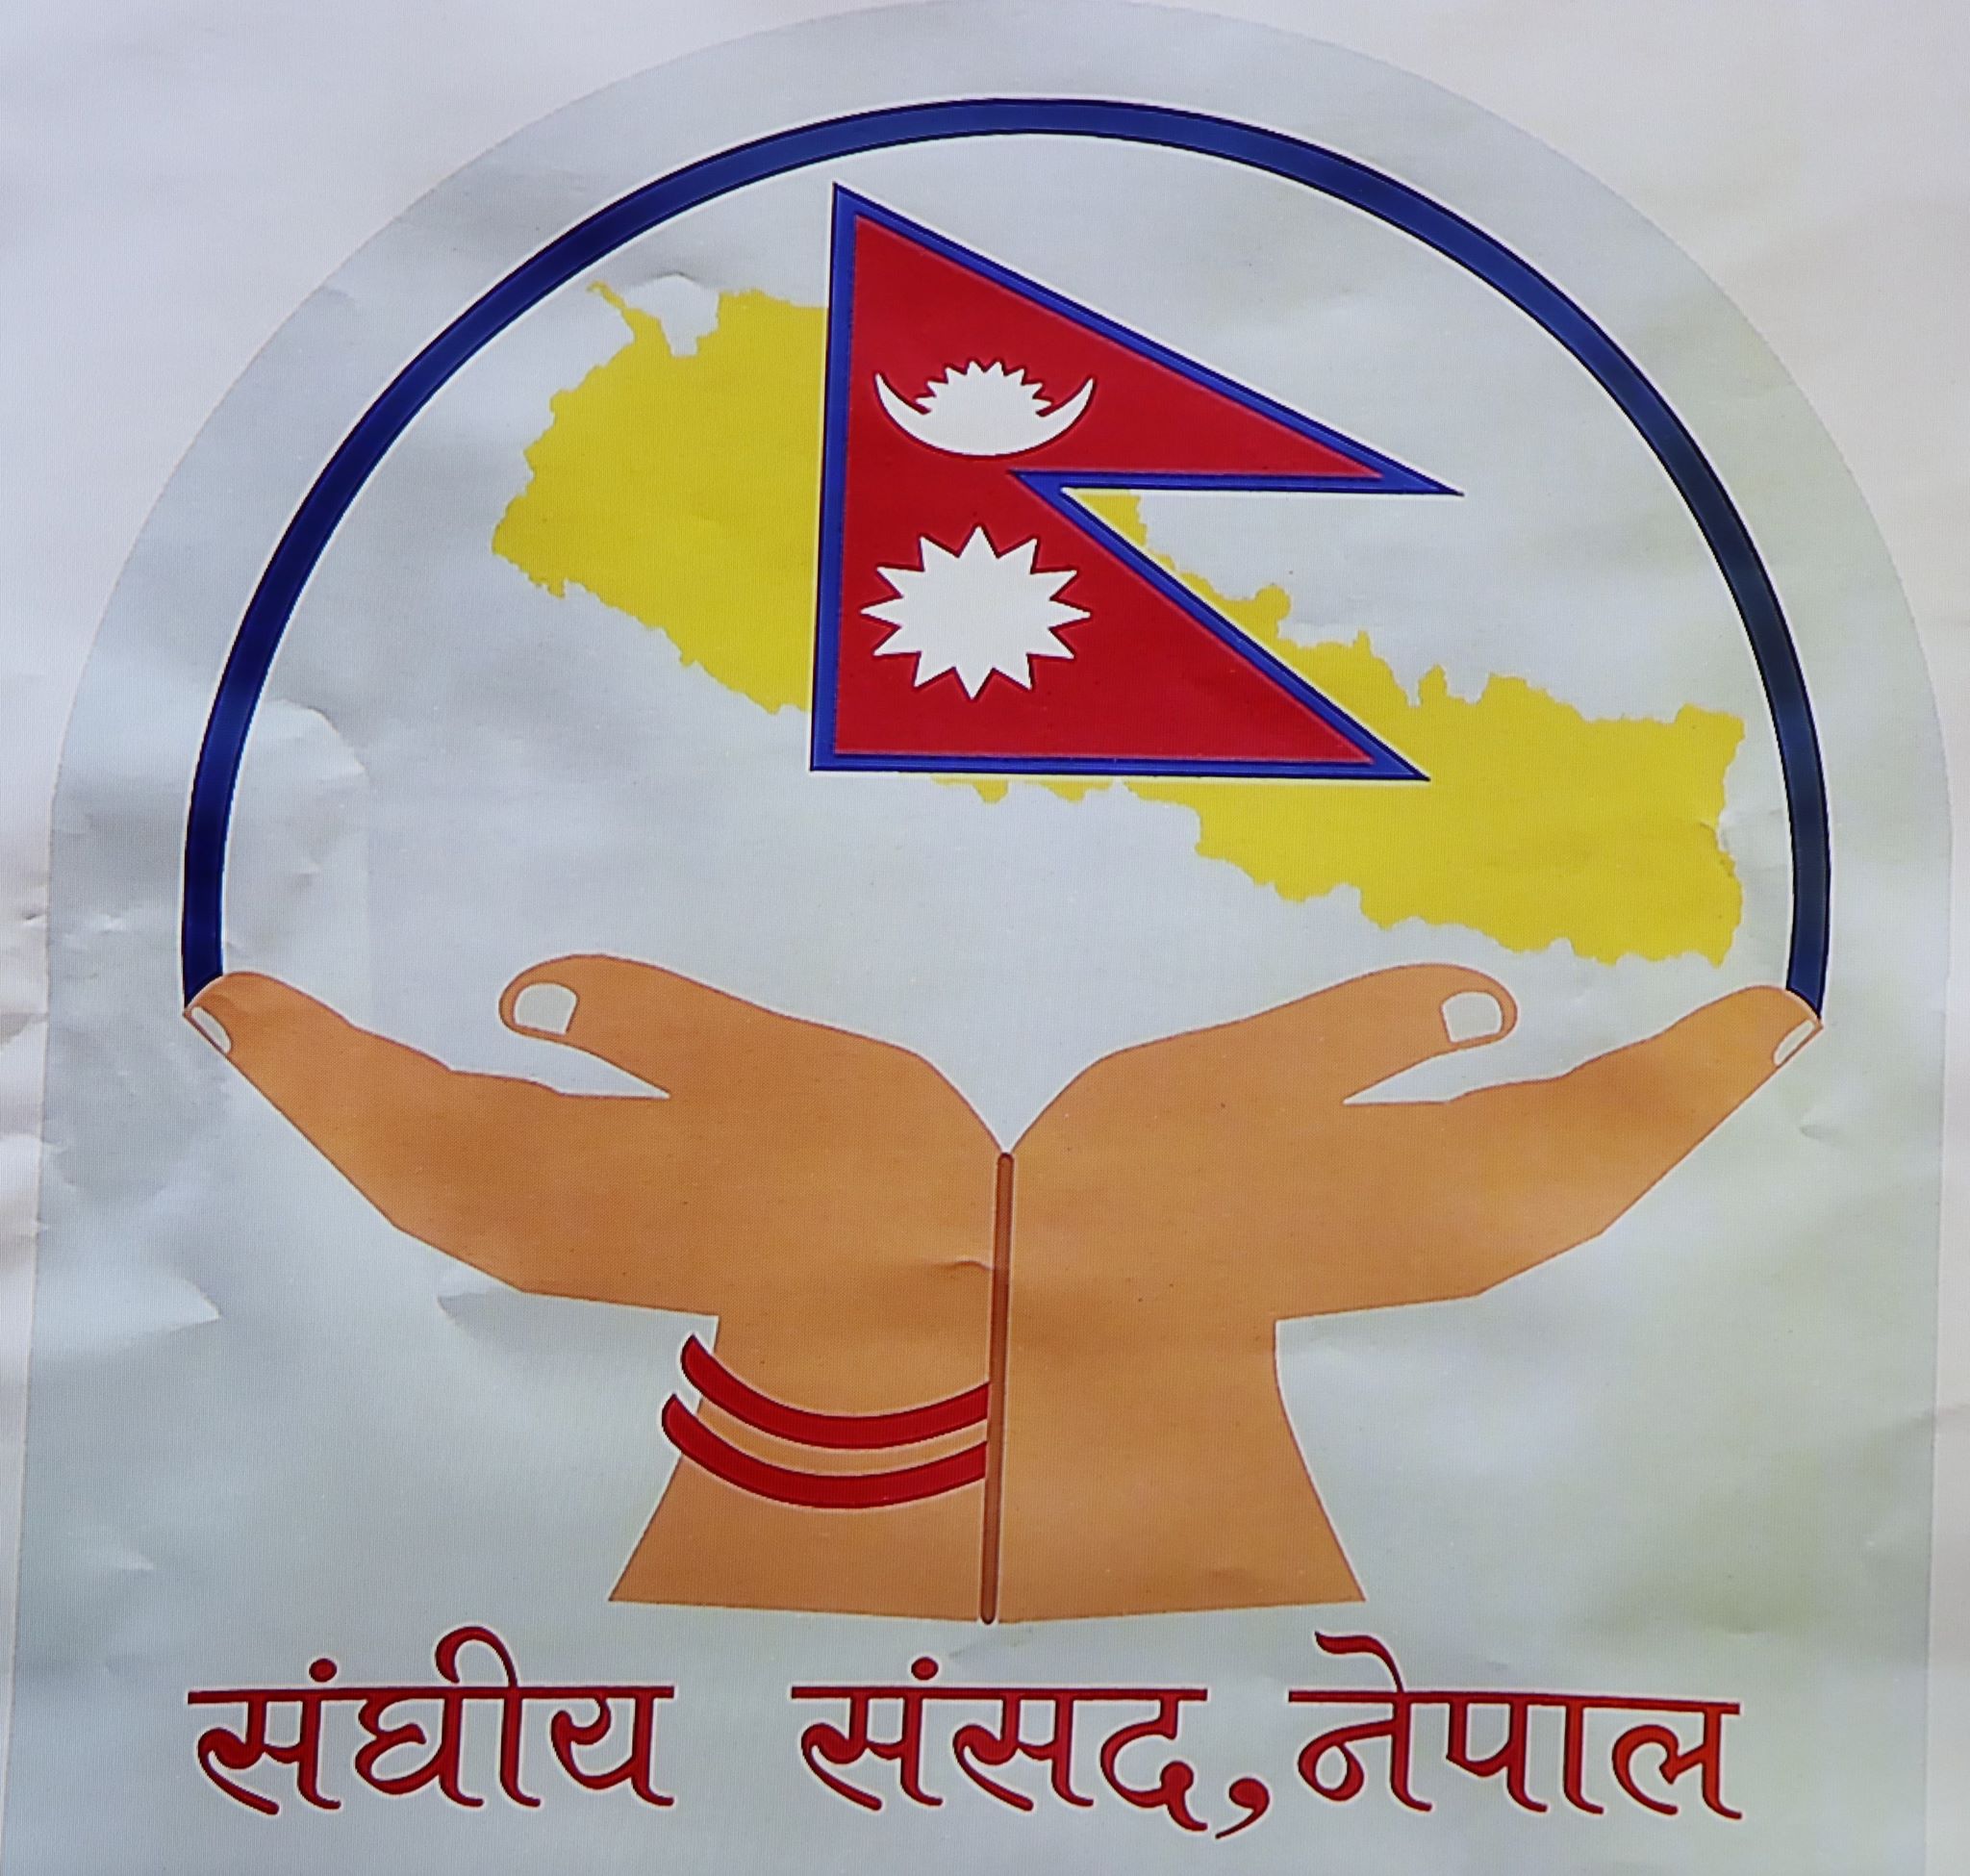 New map of Nepal adjusted in parliament’s official logo